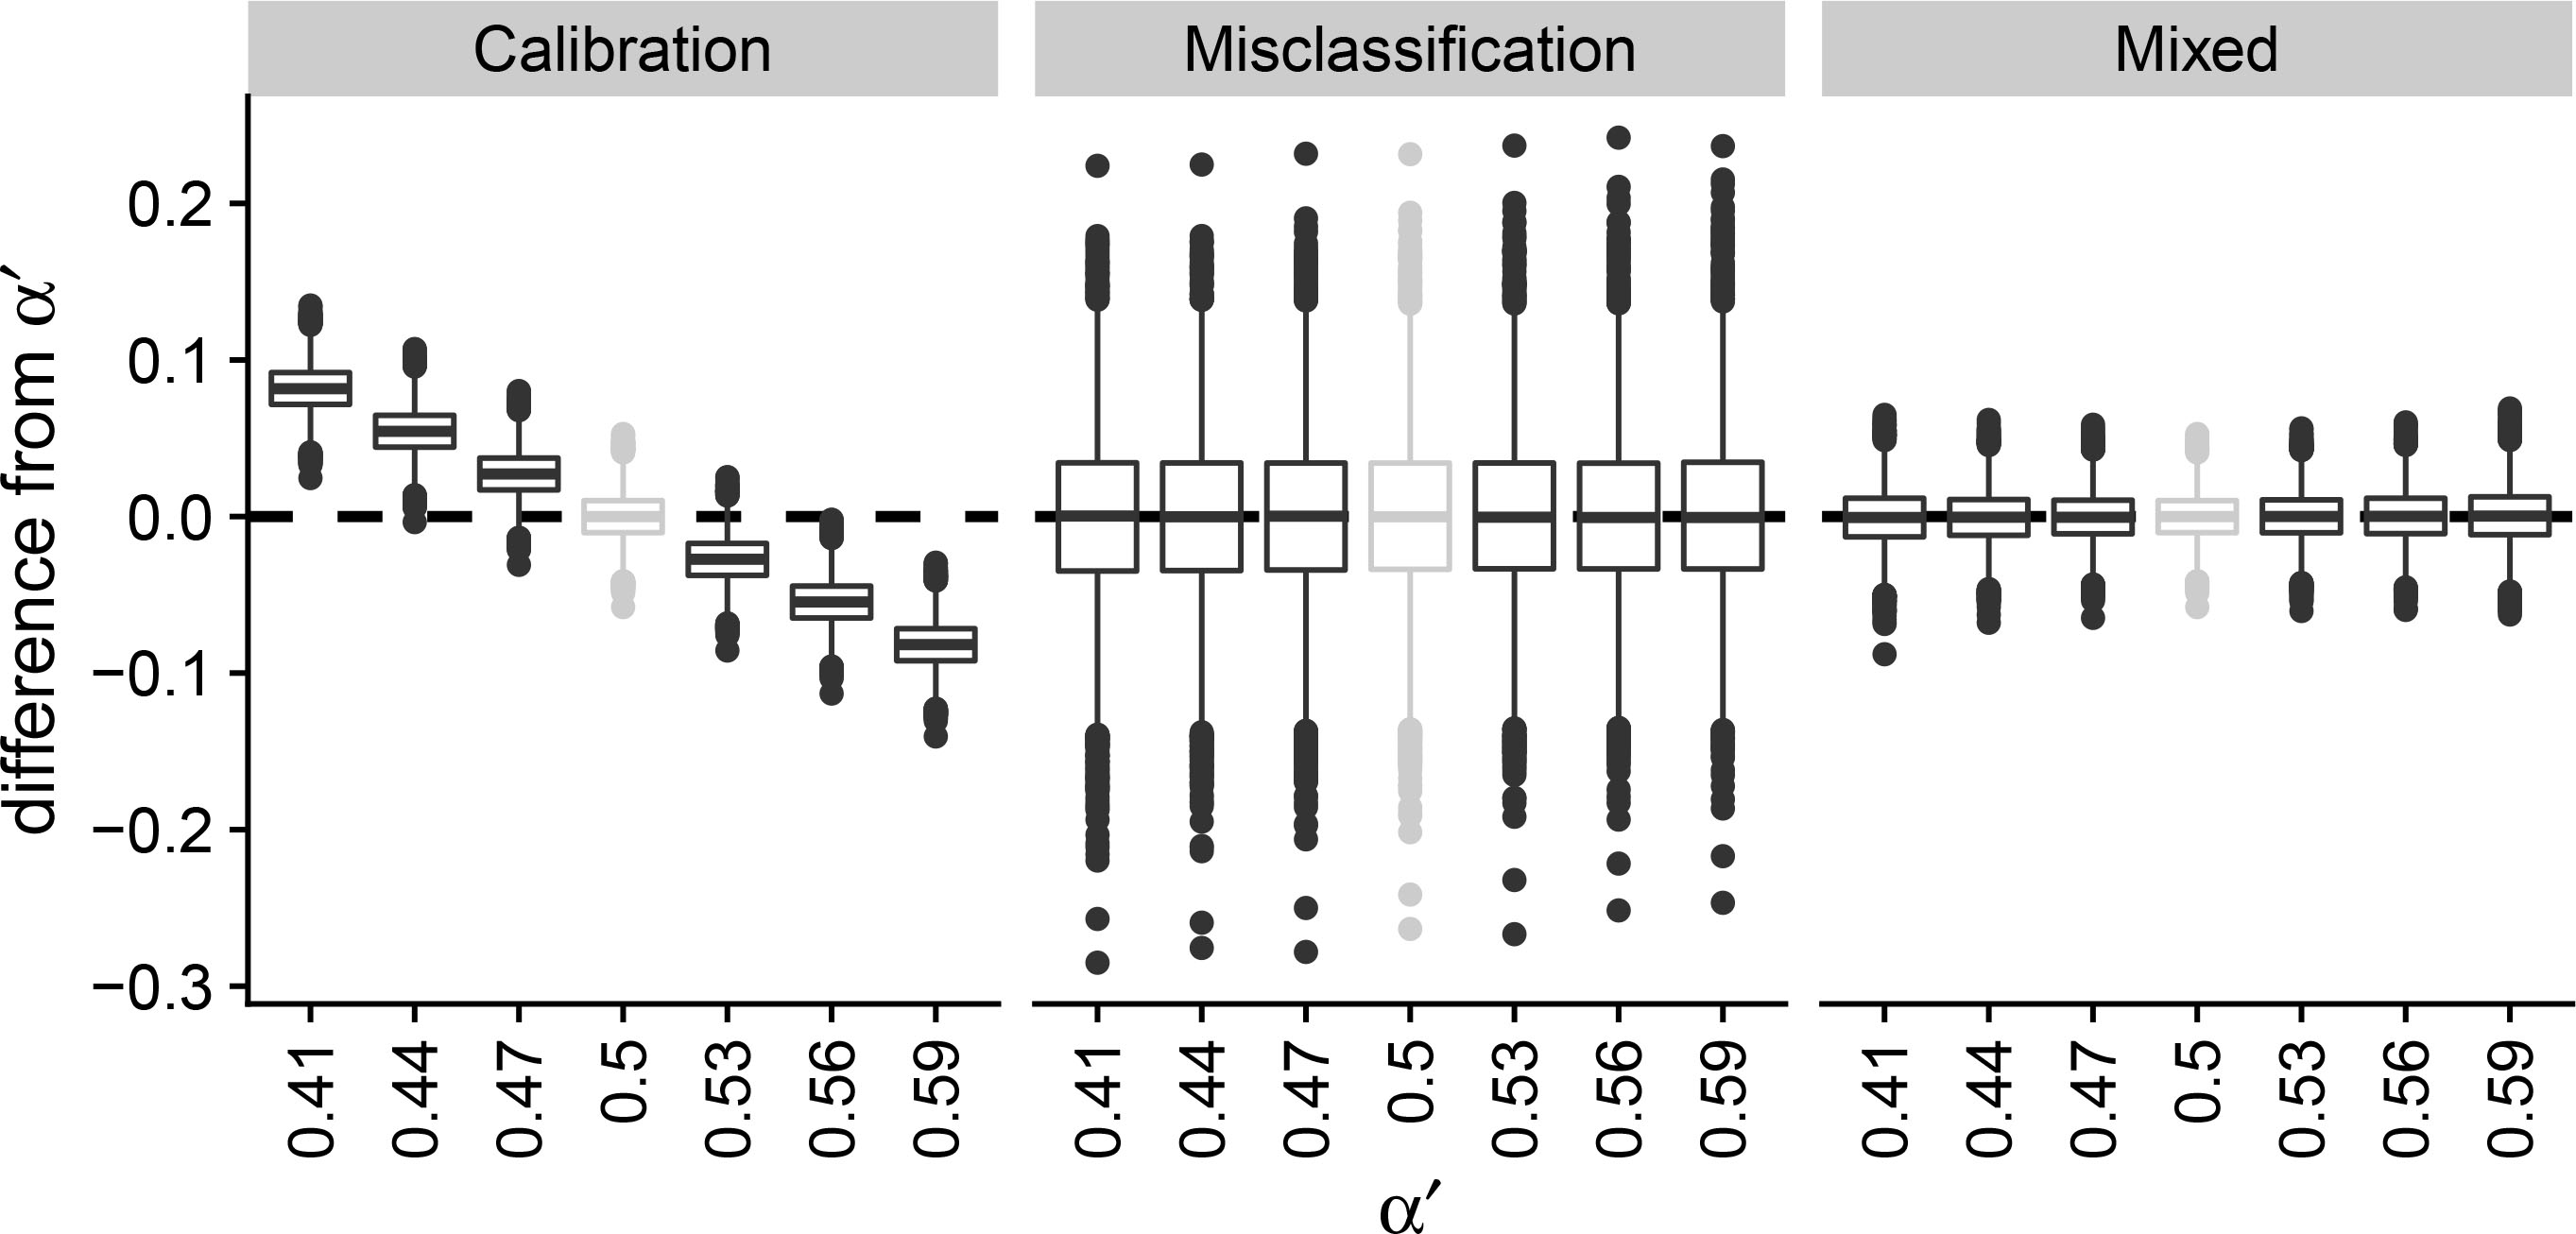 Simulation study to observe the change in prediction error under concept drift using boxplots. The calibration, misclassification and mixed estimator are compared given an initial base rate α=0.5 (grey) and different values of α′ (black). The test set is sampled from the target population with the initial base rate. The x-axis shows the different base rates and the y-axis shows the distribution of the difference from the new base rate α′. All the parameters: p00=0.6, p11=0.7, n=1,000 and N=3×105, B=10,000.